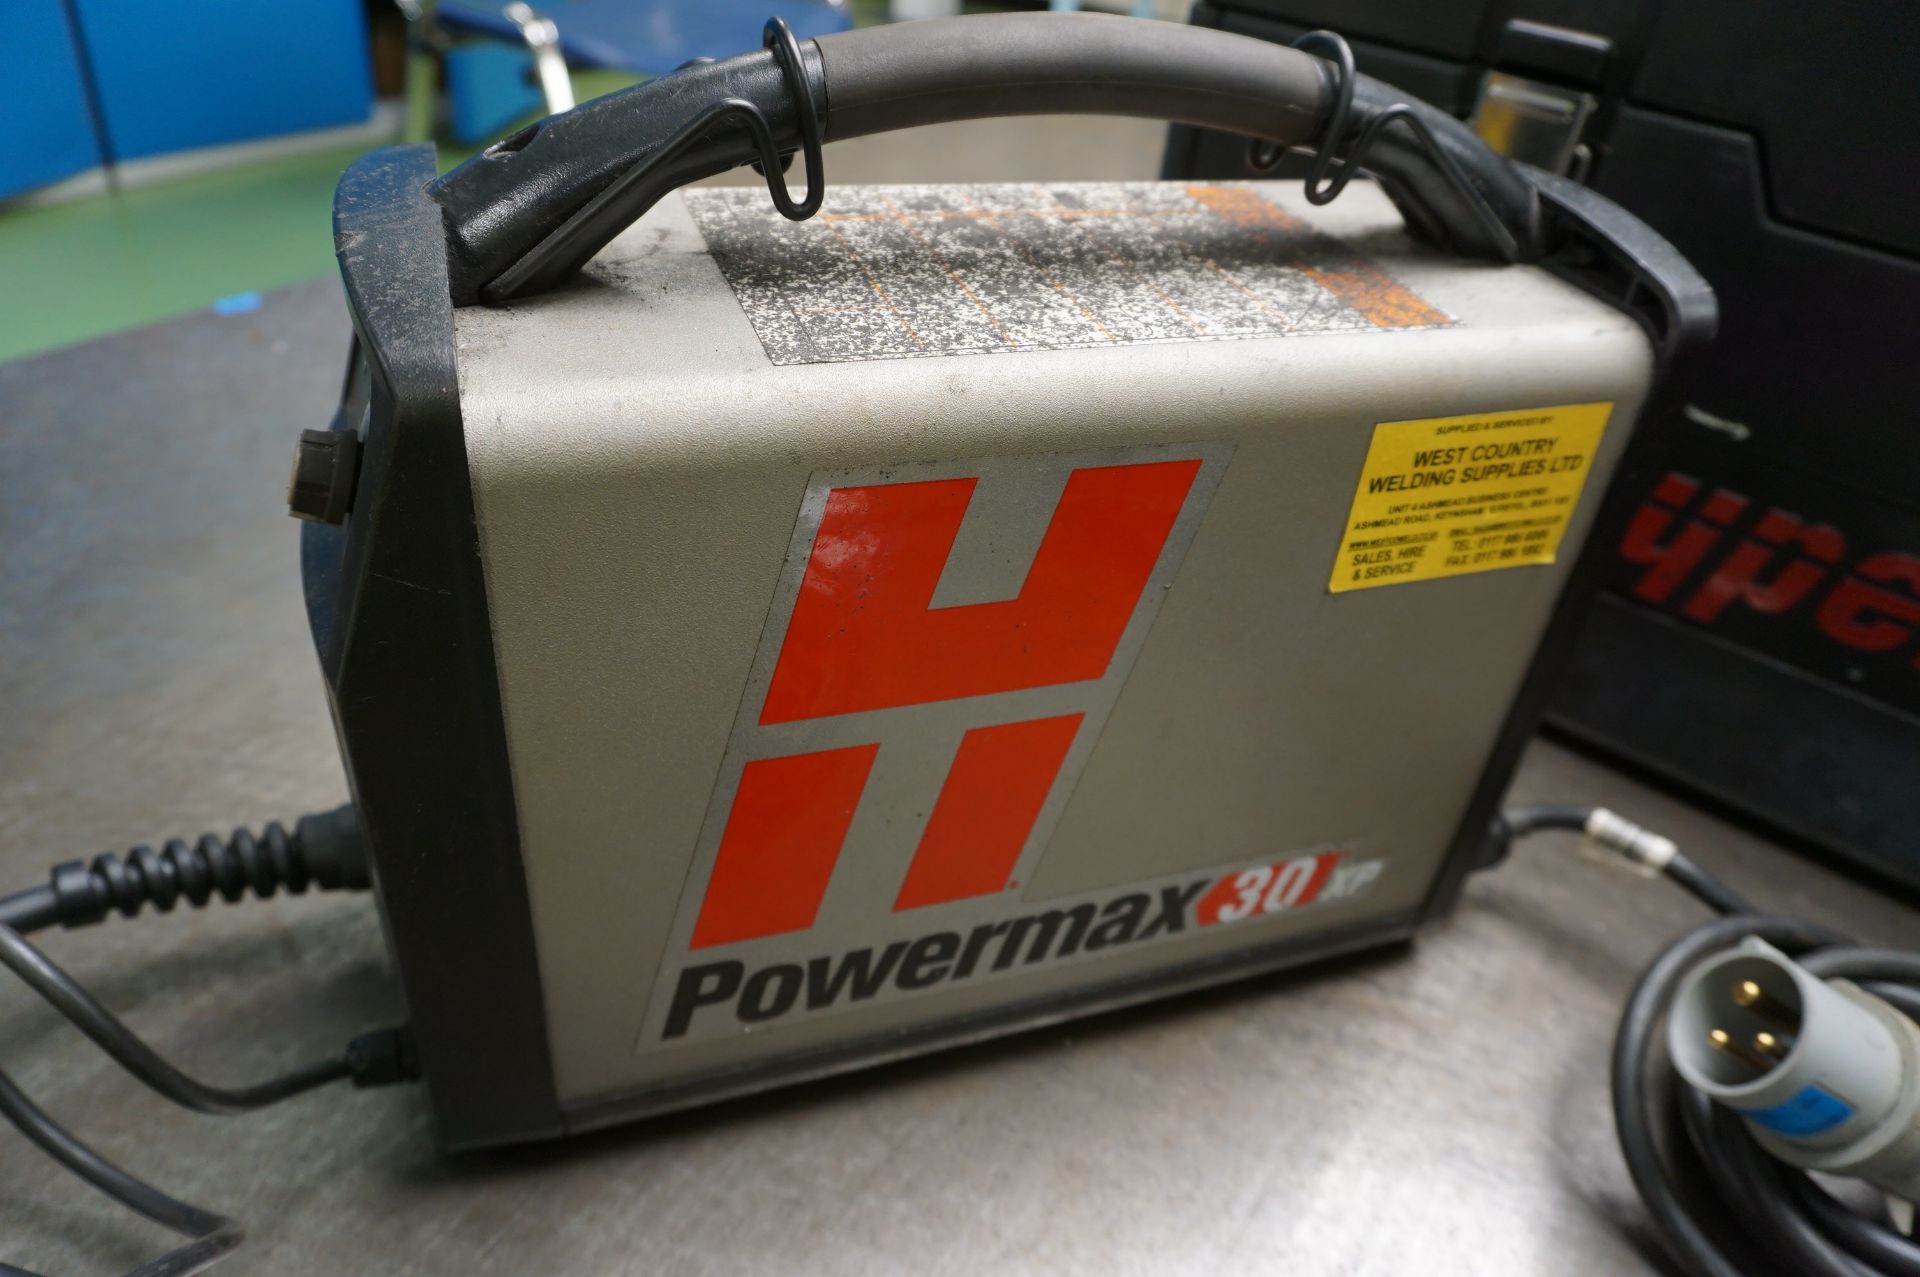 Hypertherm Powermax 30xp plasma cutter with carry case - Image 3 of 5